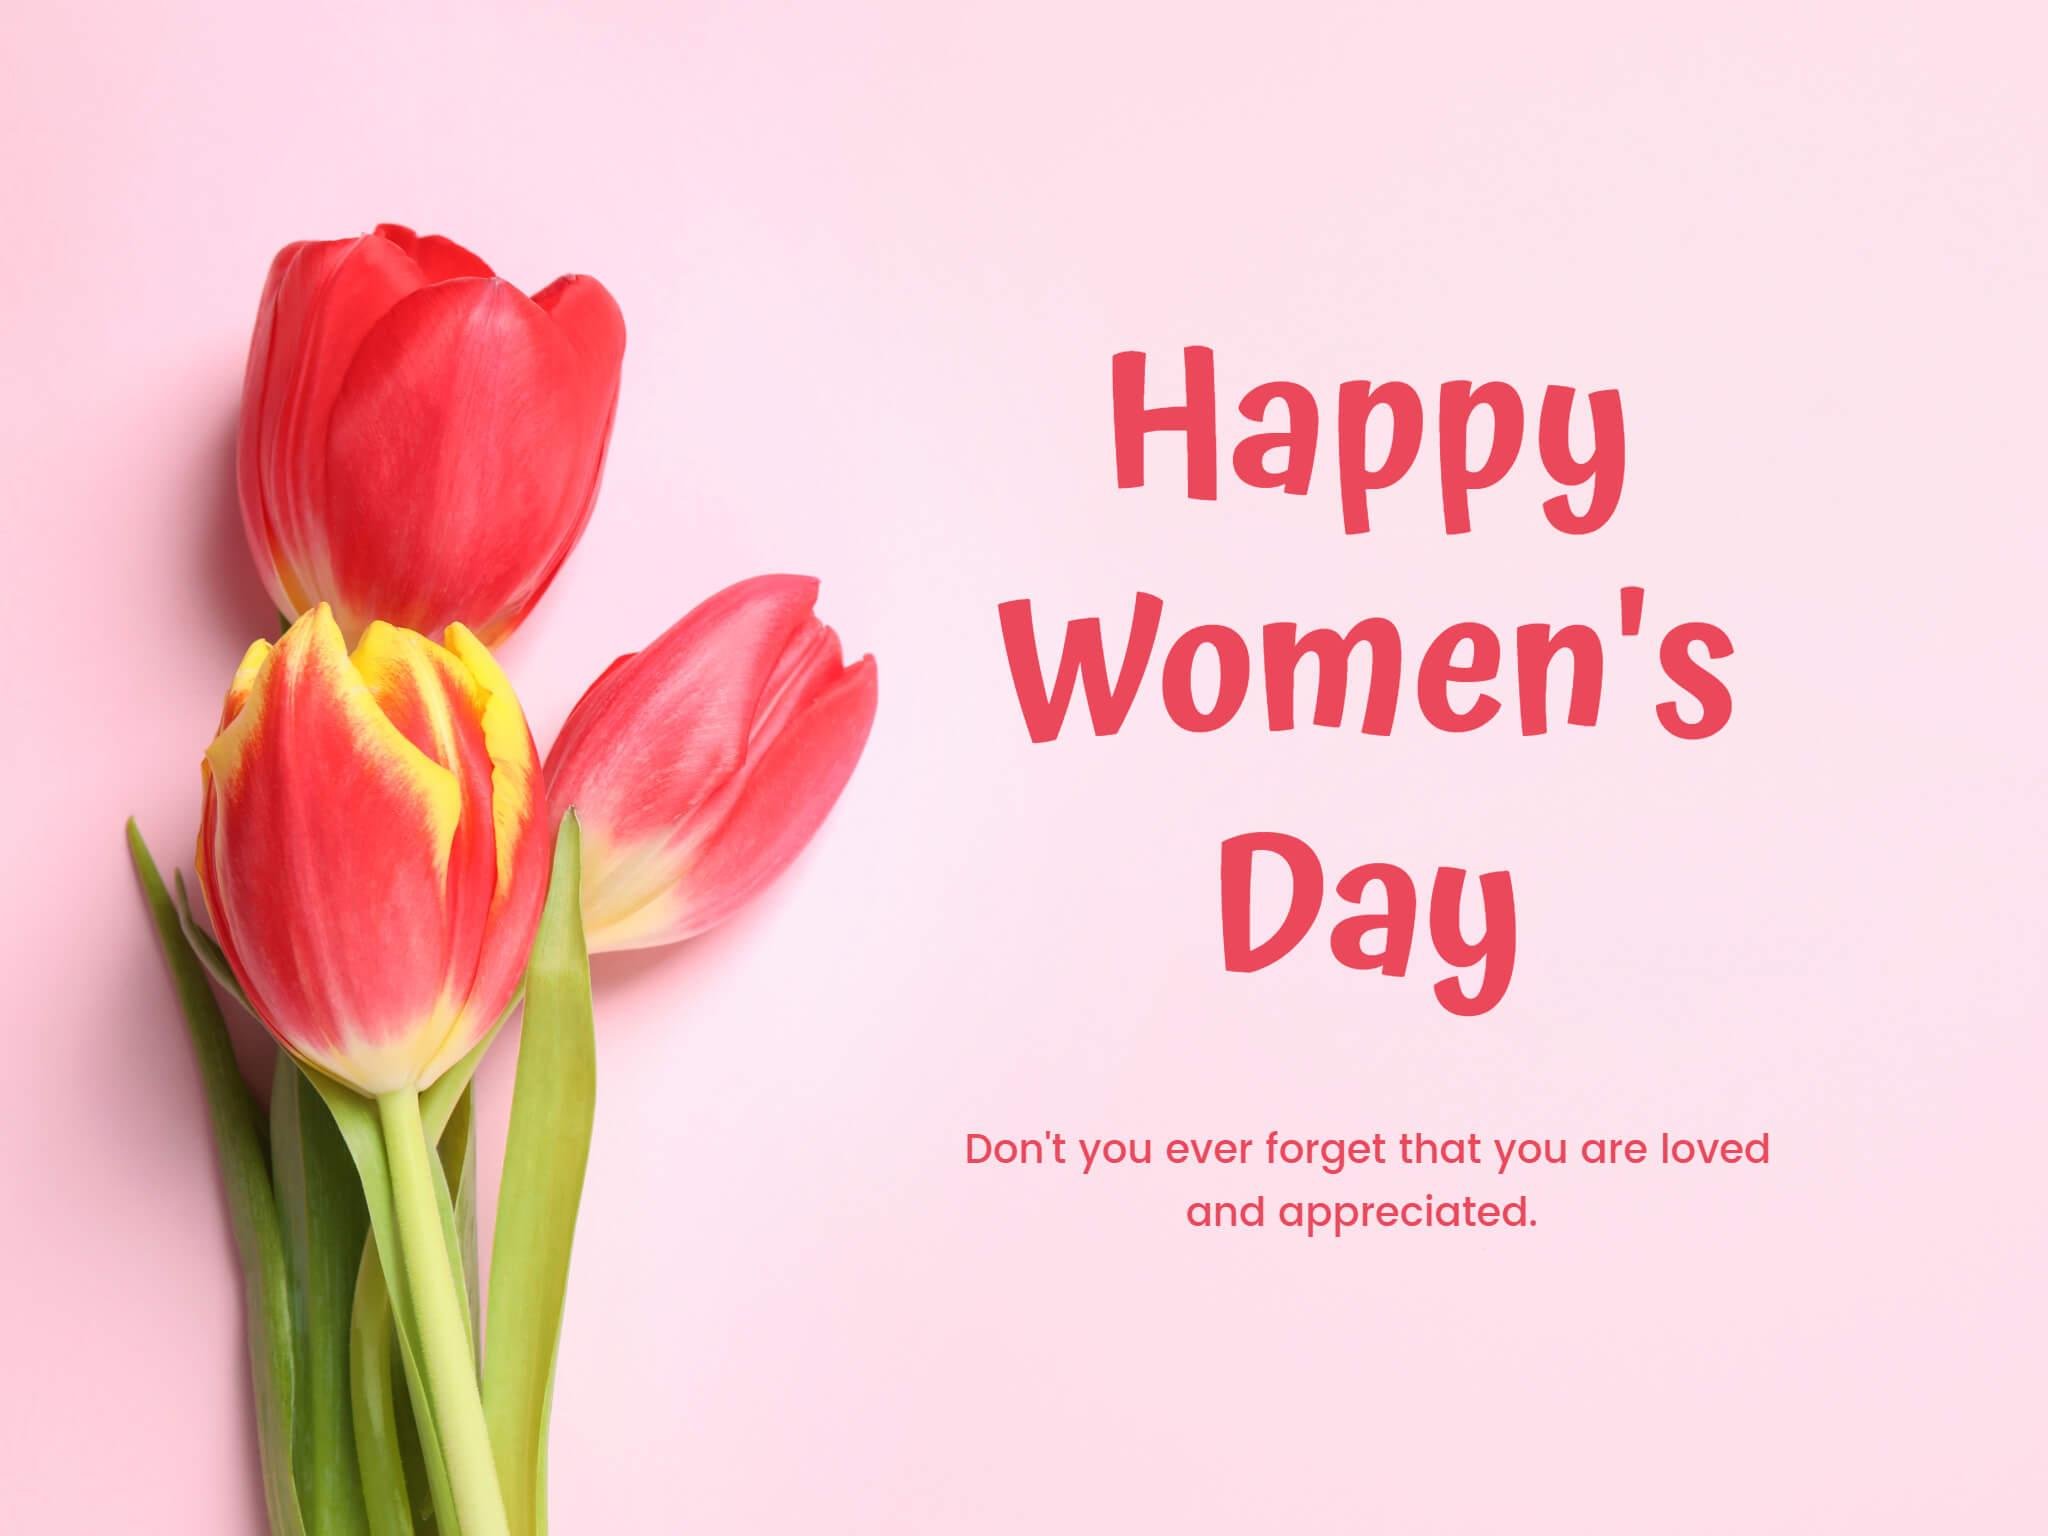 https://imgv3.fotor.com/images/share/Pink-Floral-Happy-Womens-Day-Card.jpg